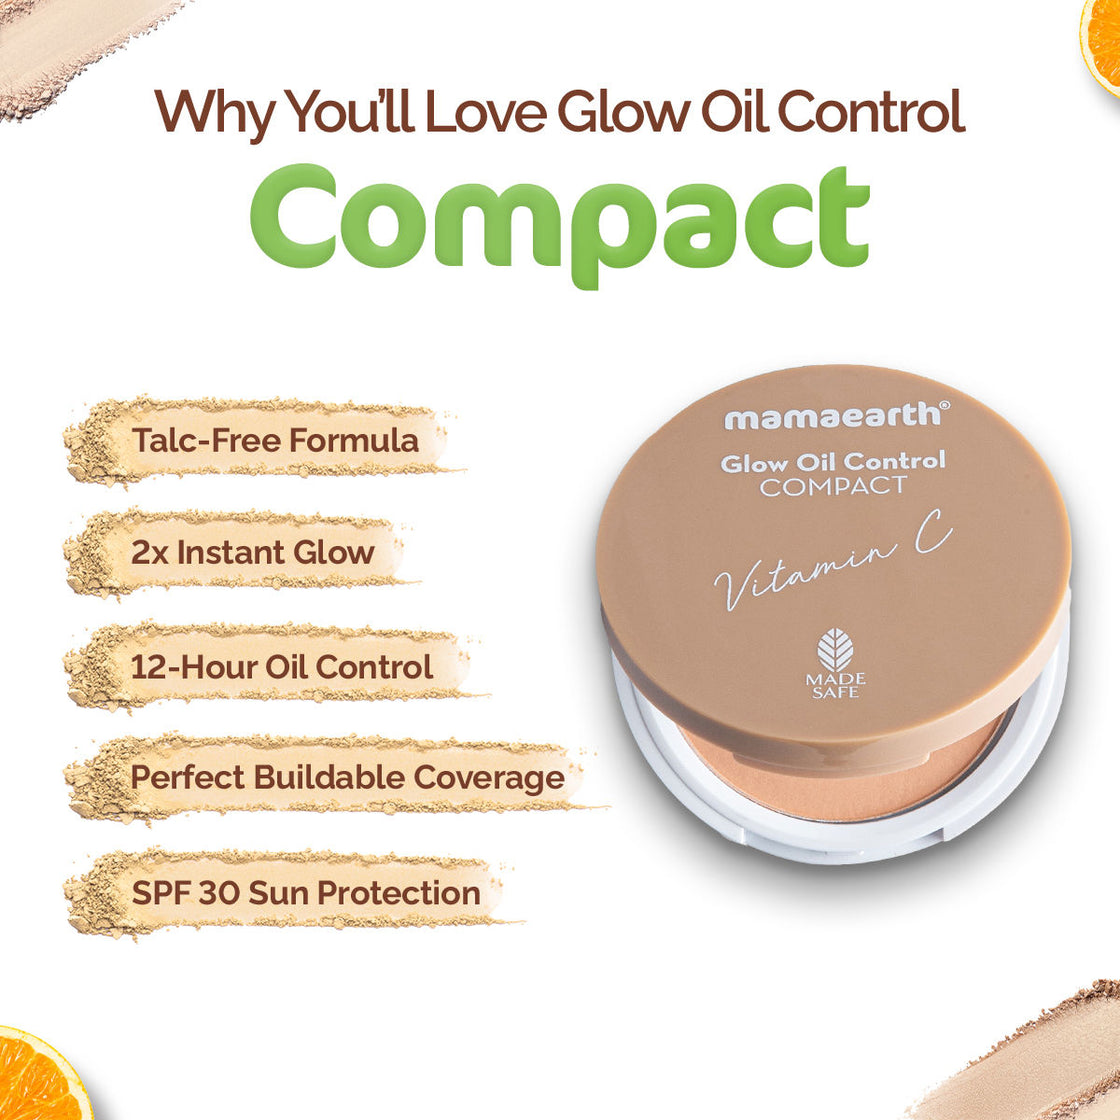 Mamaearth Glow Oil Control Compact Spf 30 With Vitamin C & Turmeric - 01 Ivory Glow-6